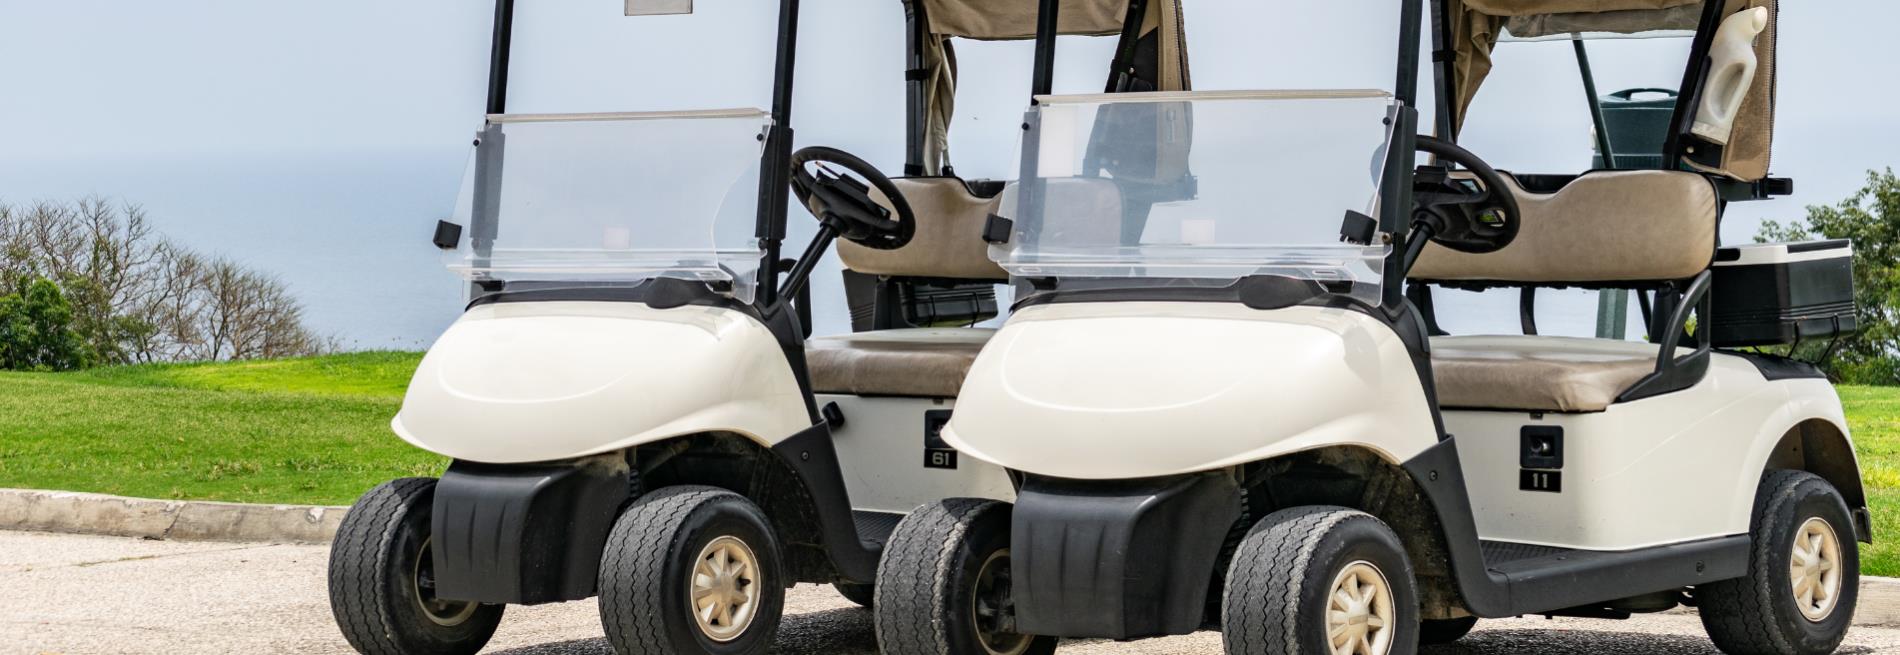 banner-golf-car-nuove-usate-000.png